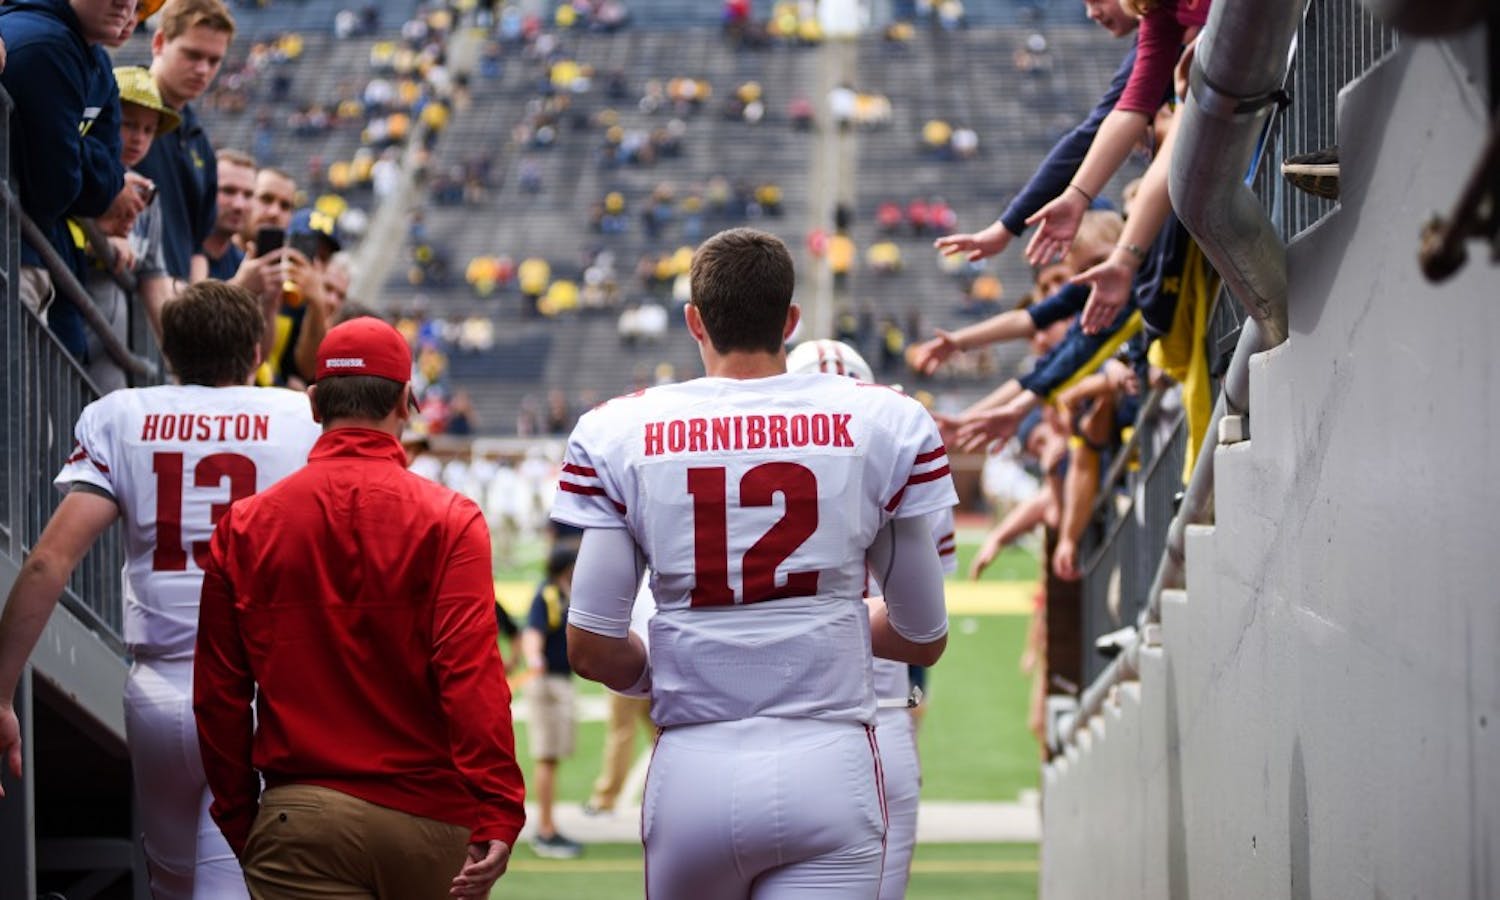 Quarterback Alex Hornibrook was inconsistent in his three years as a starter, but he reached heights few Wisconsin signal callers have achieved.